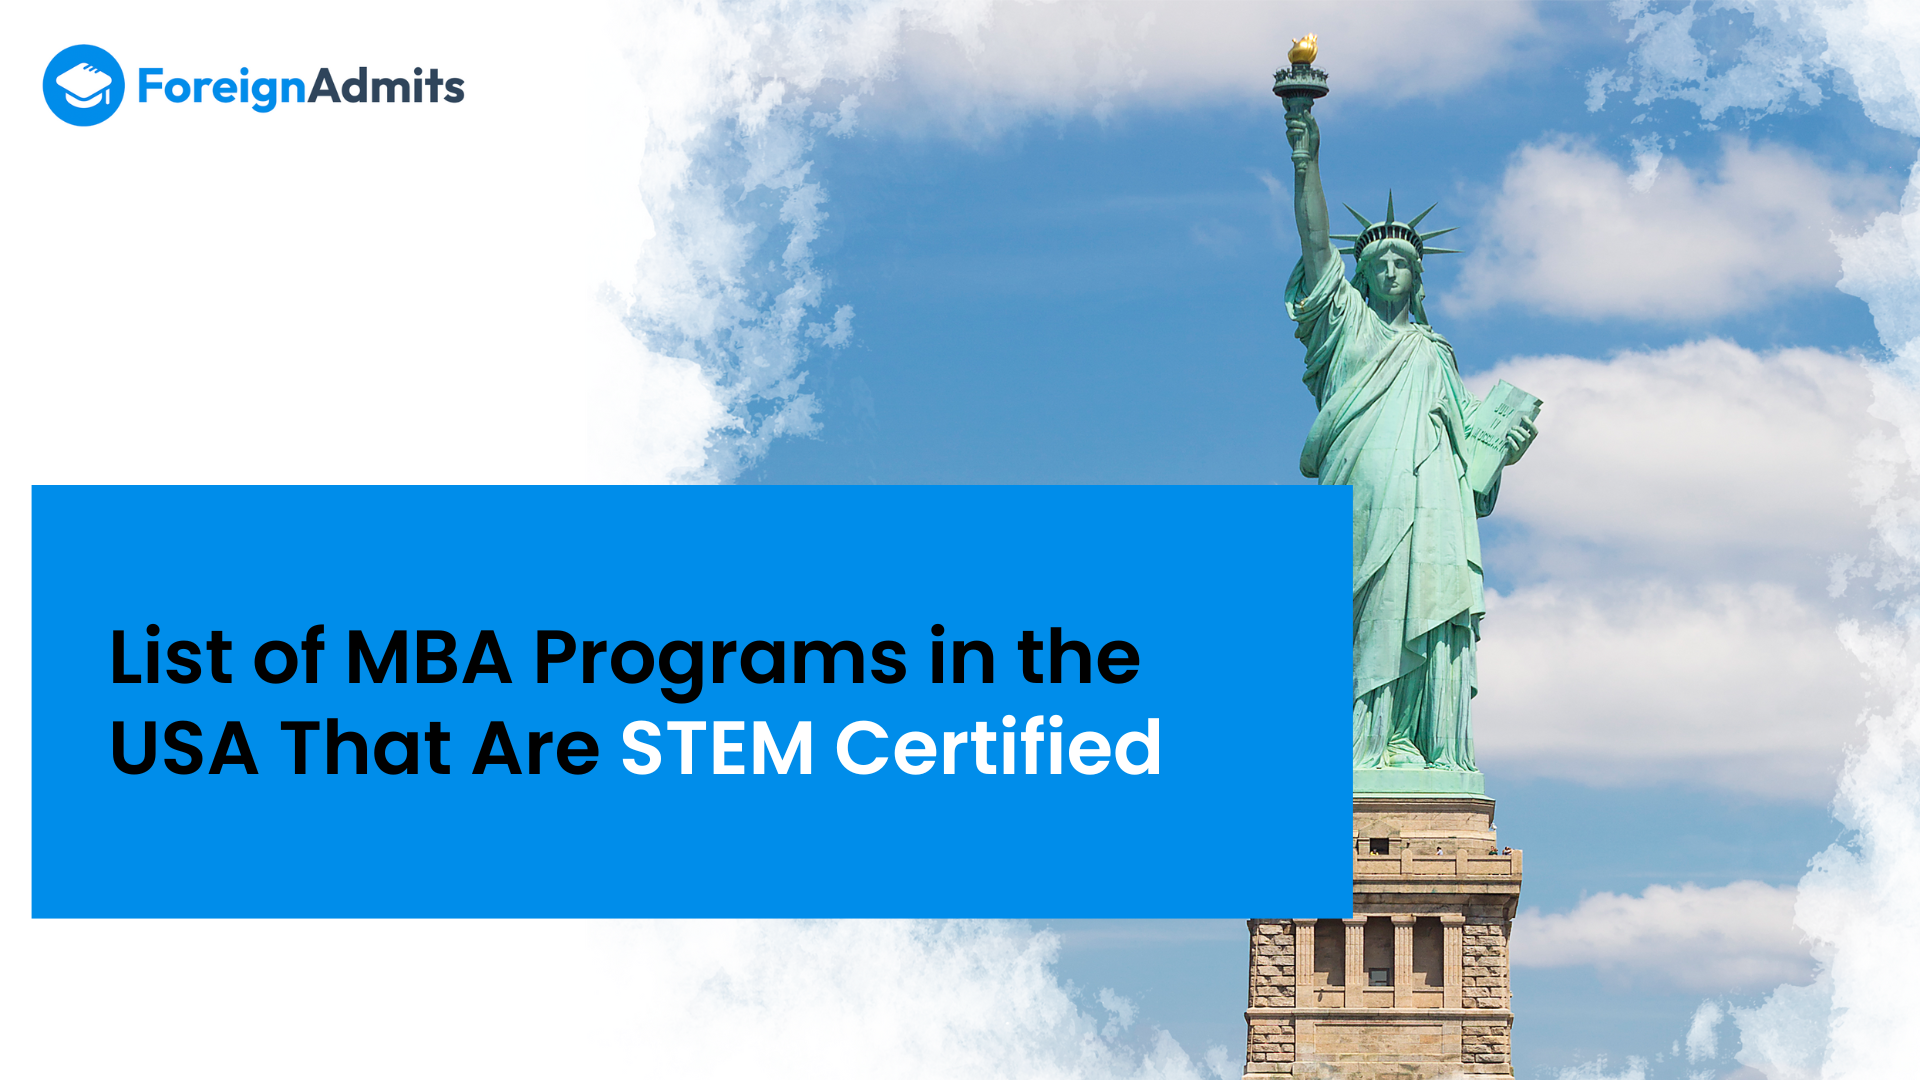 List of MBA Programs in the USA That Are STEM Certified